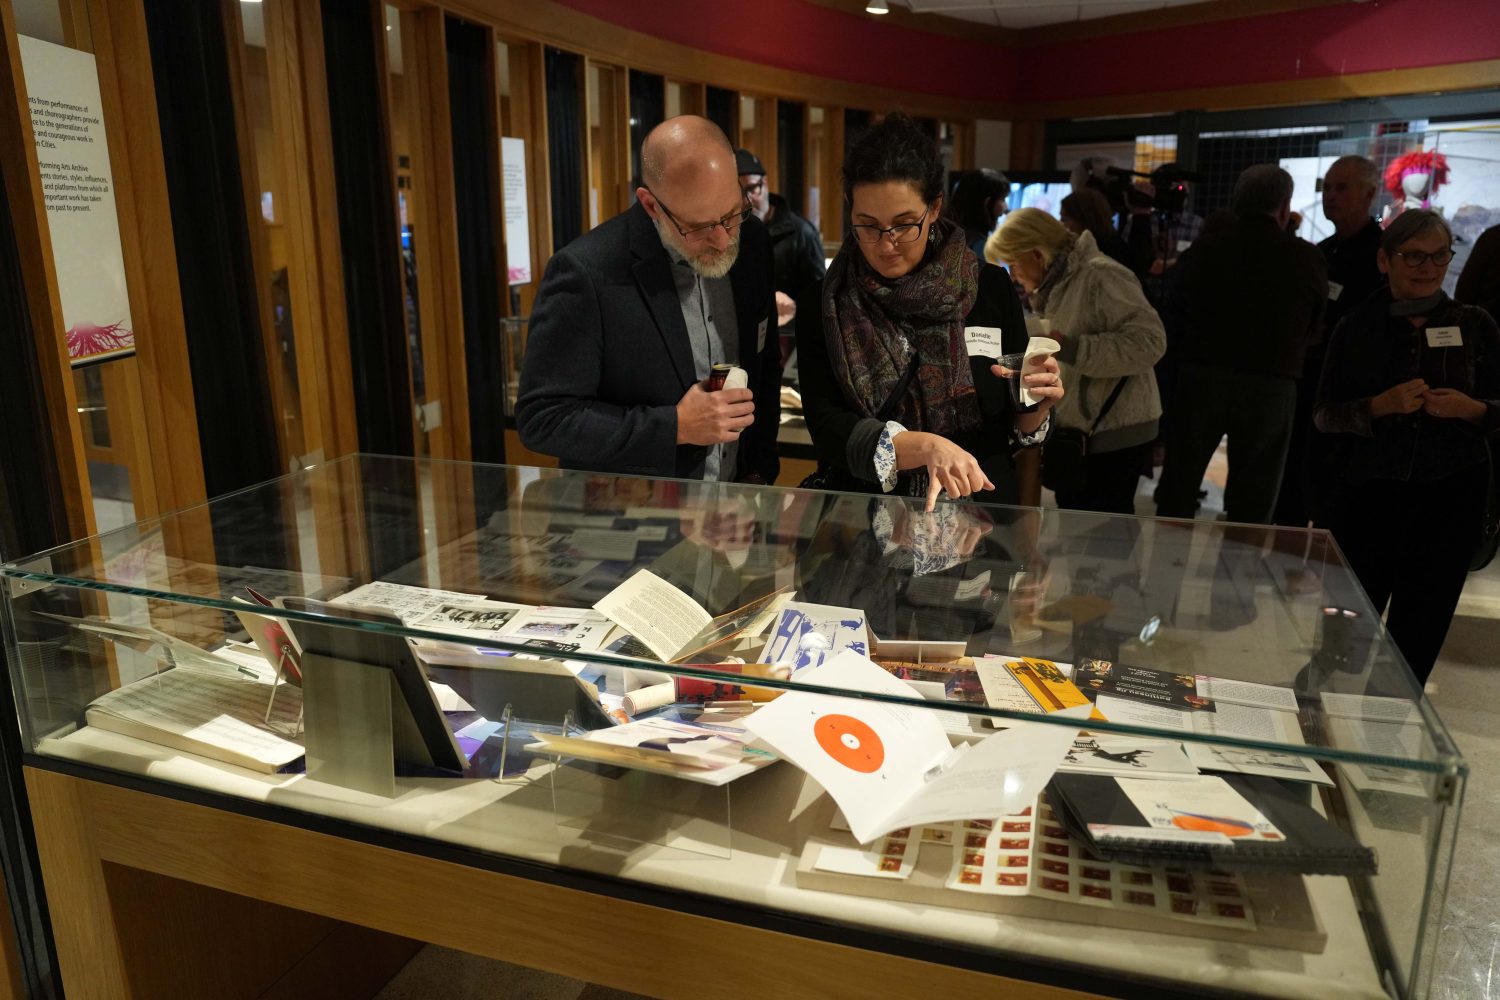 Attendees browse the display cases at the opening of PAA's "Dance Roots" exhibit, on Oct. 27, 2023. Exhibit designed by Darren Terpstra. (Photo/Luke Logan)